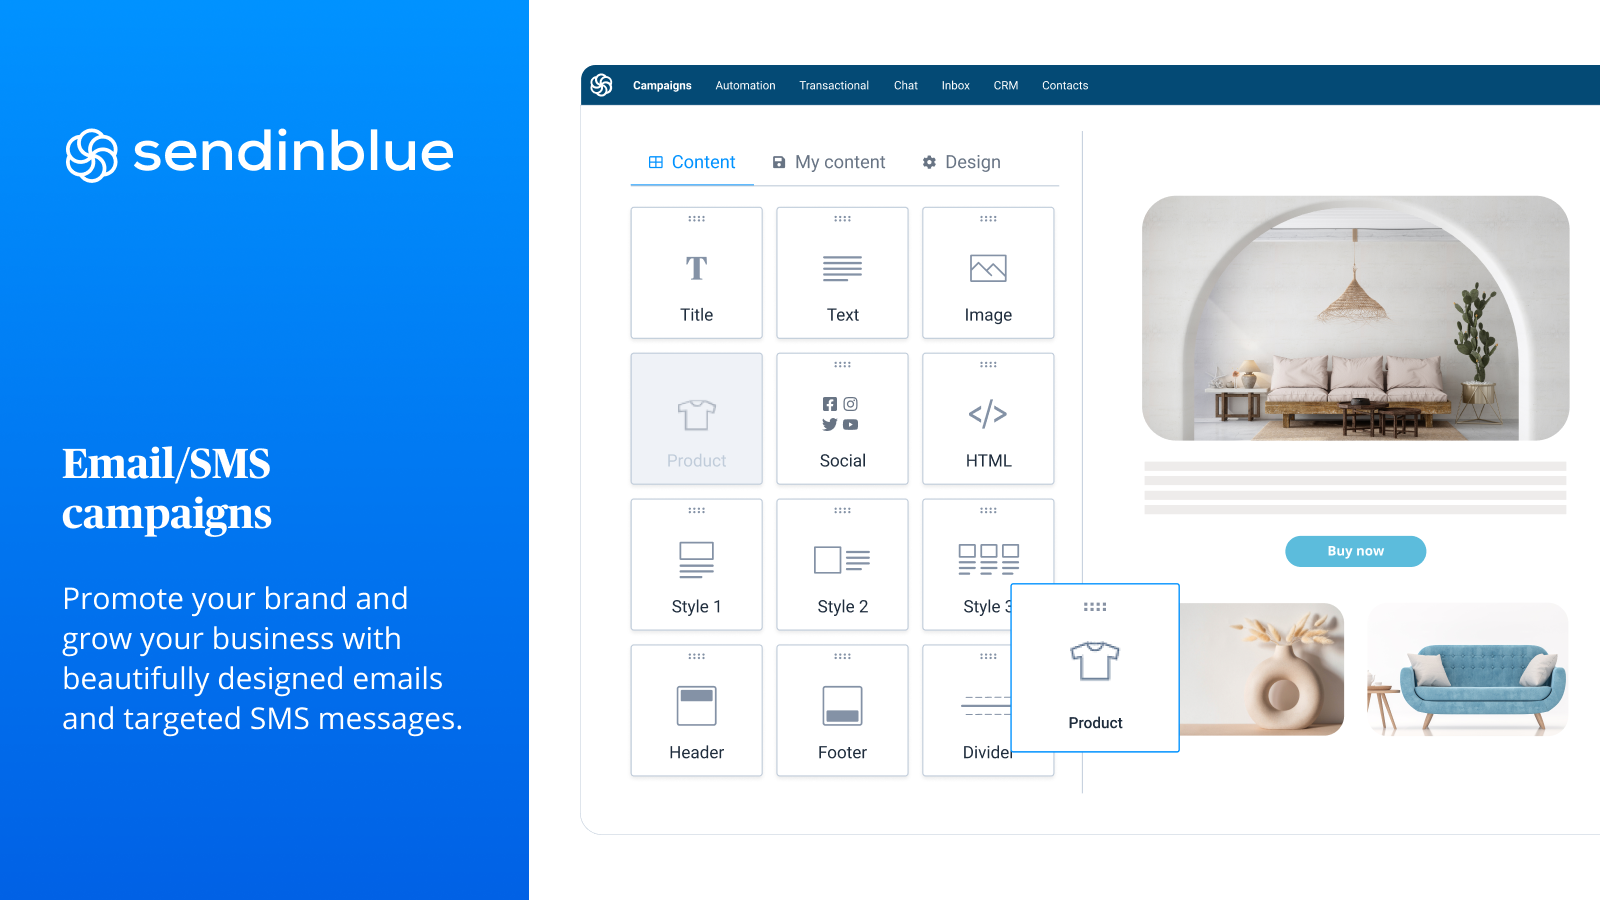 Sendinblue Software - Build beautiful campaigns with our drag & drop email builder